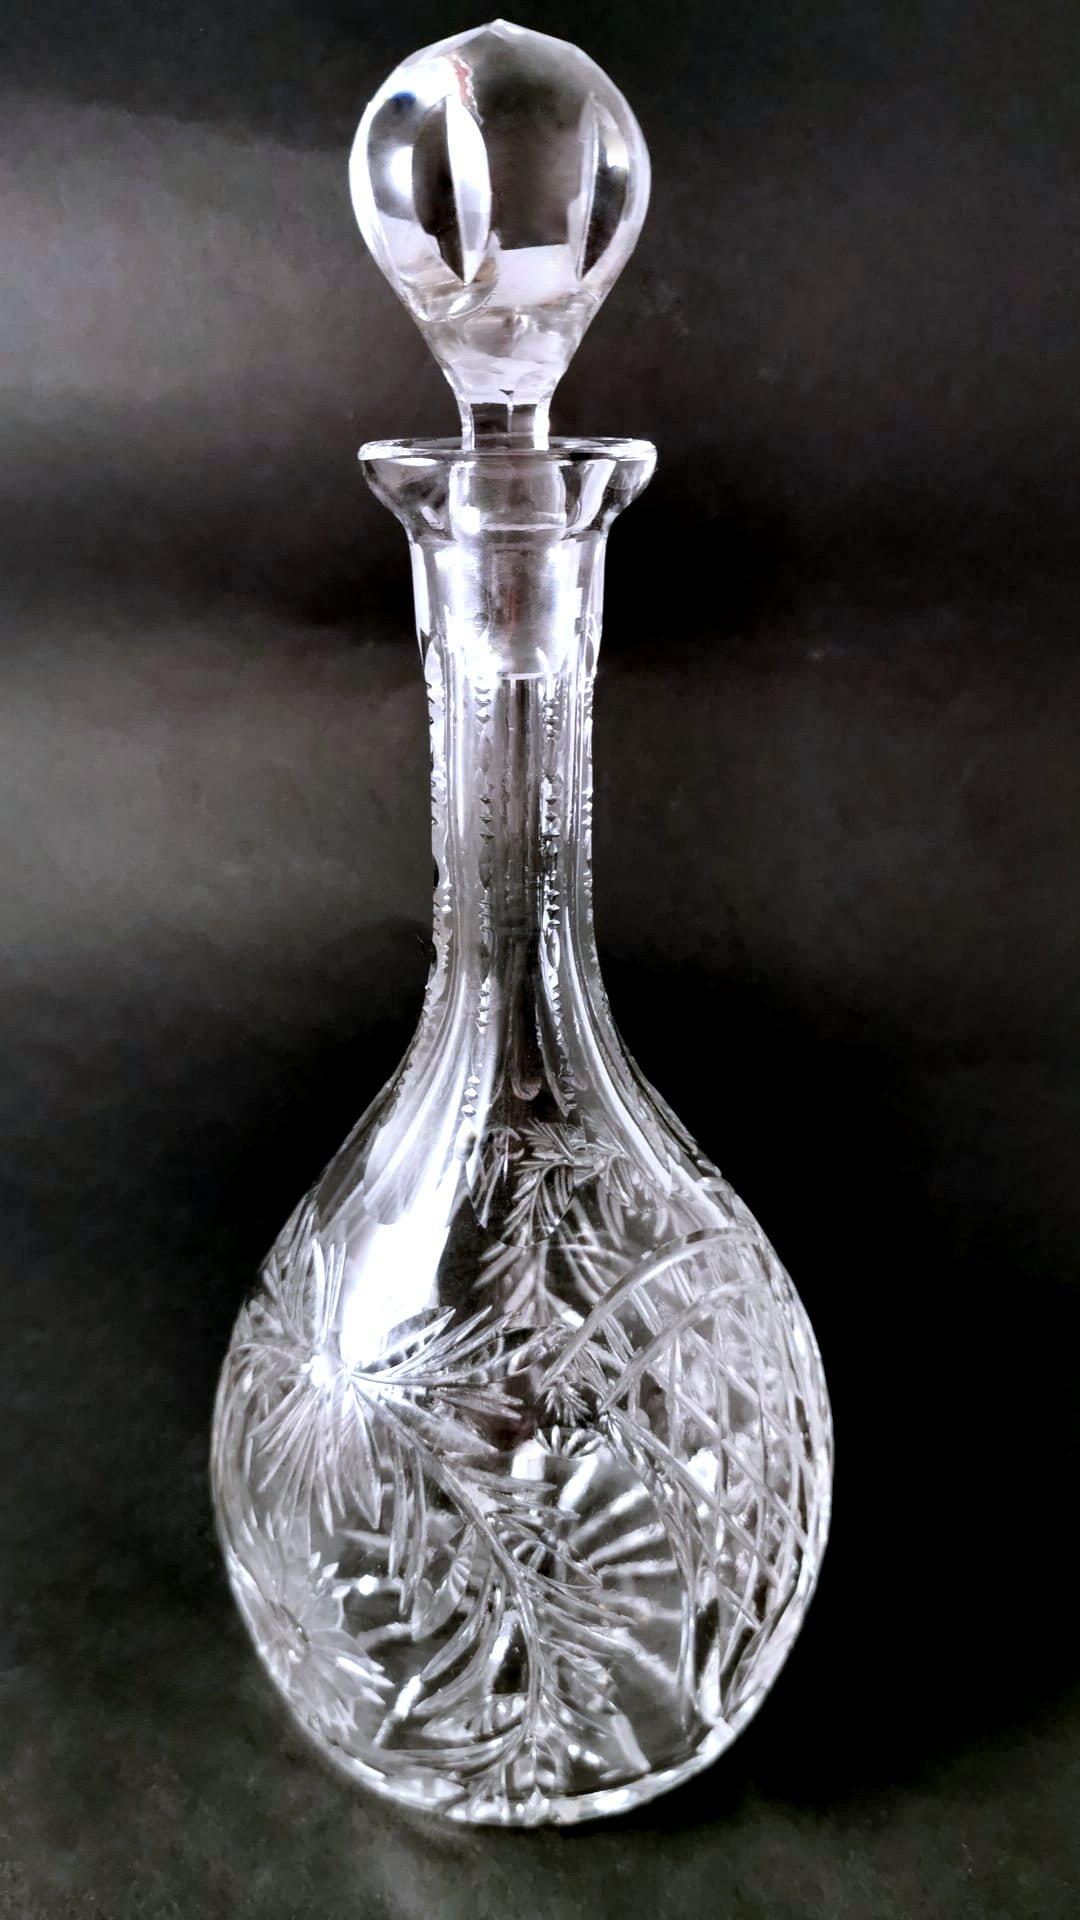 We kindly suggest that you read the entire description, as we try to give you detailed technical and historical information to guarantee the authenticity of our objects. Bottle from Bohemia made of hand-cut and ground crystal; it has a classic bulb